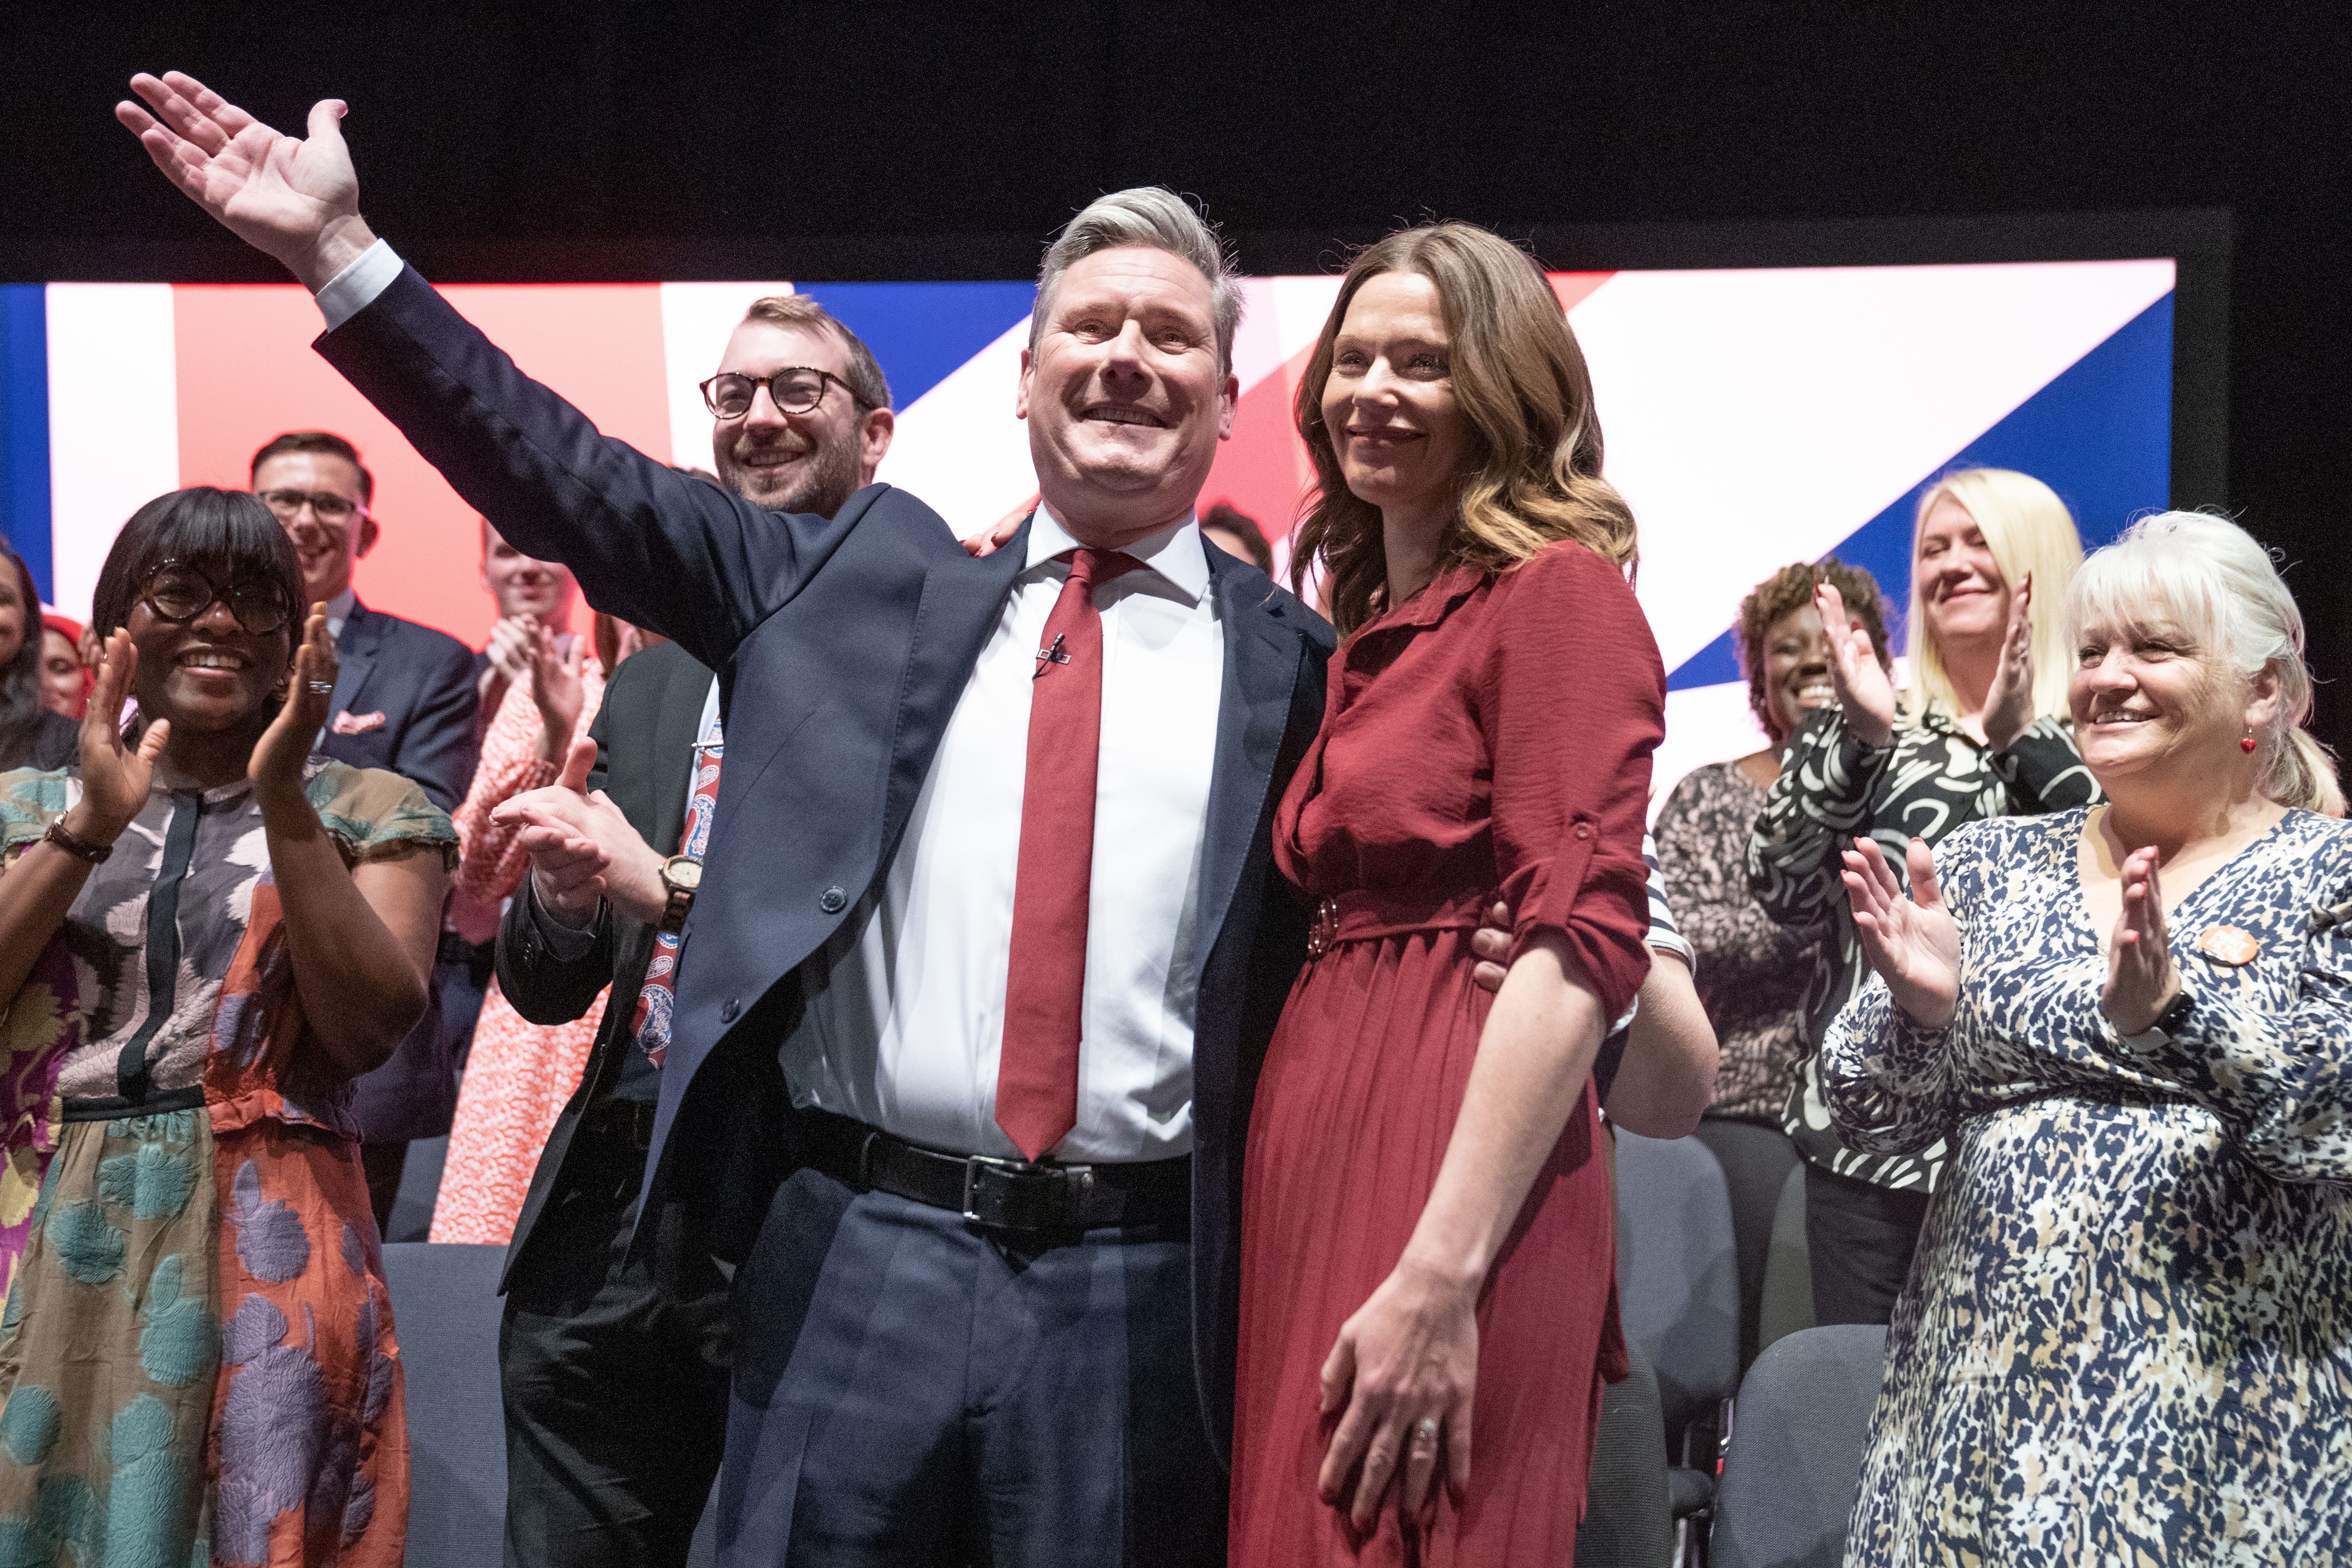 Half the public now believe it is likely Sir Keir Starmer will become prime minister – as expectations grow of a Labour general election victory amid troubles for the Government (PA)